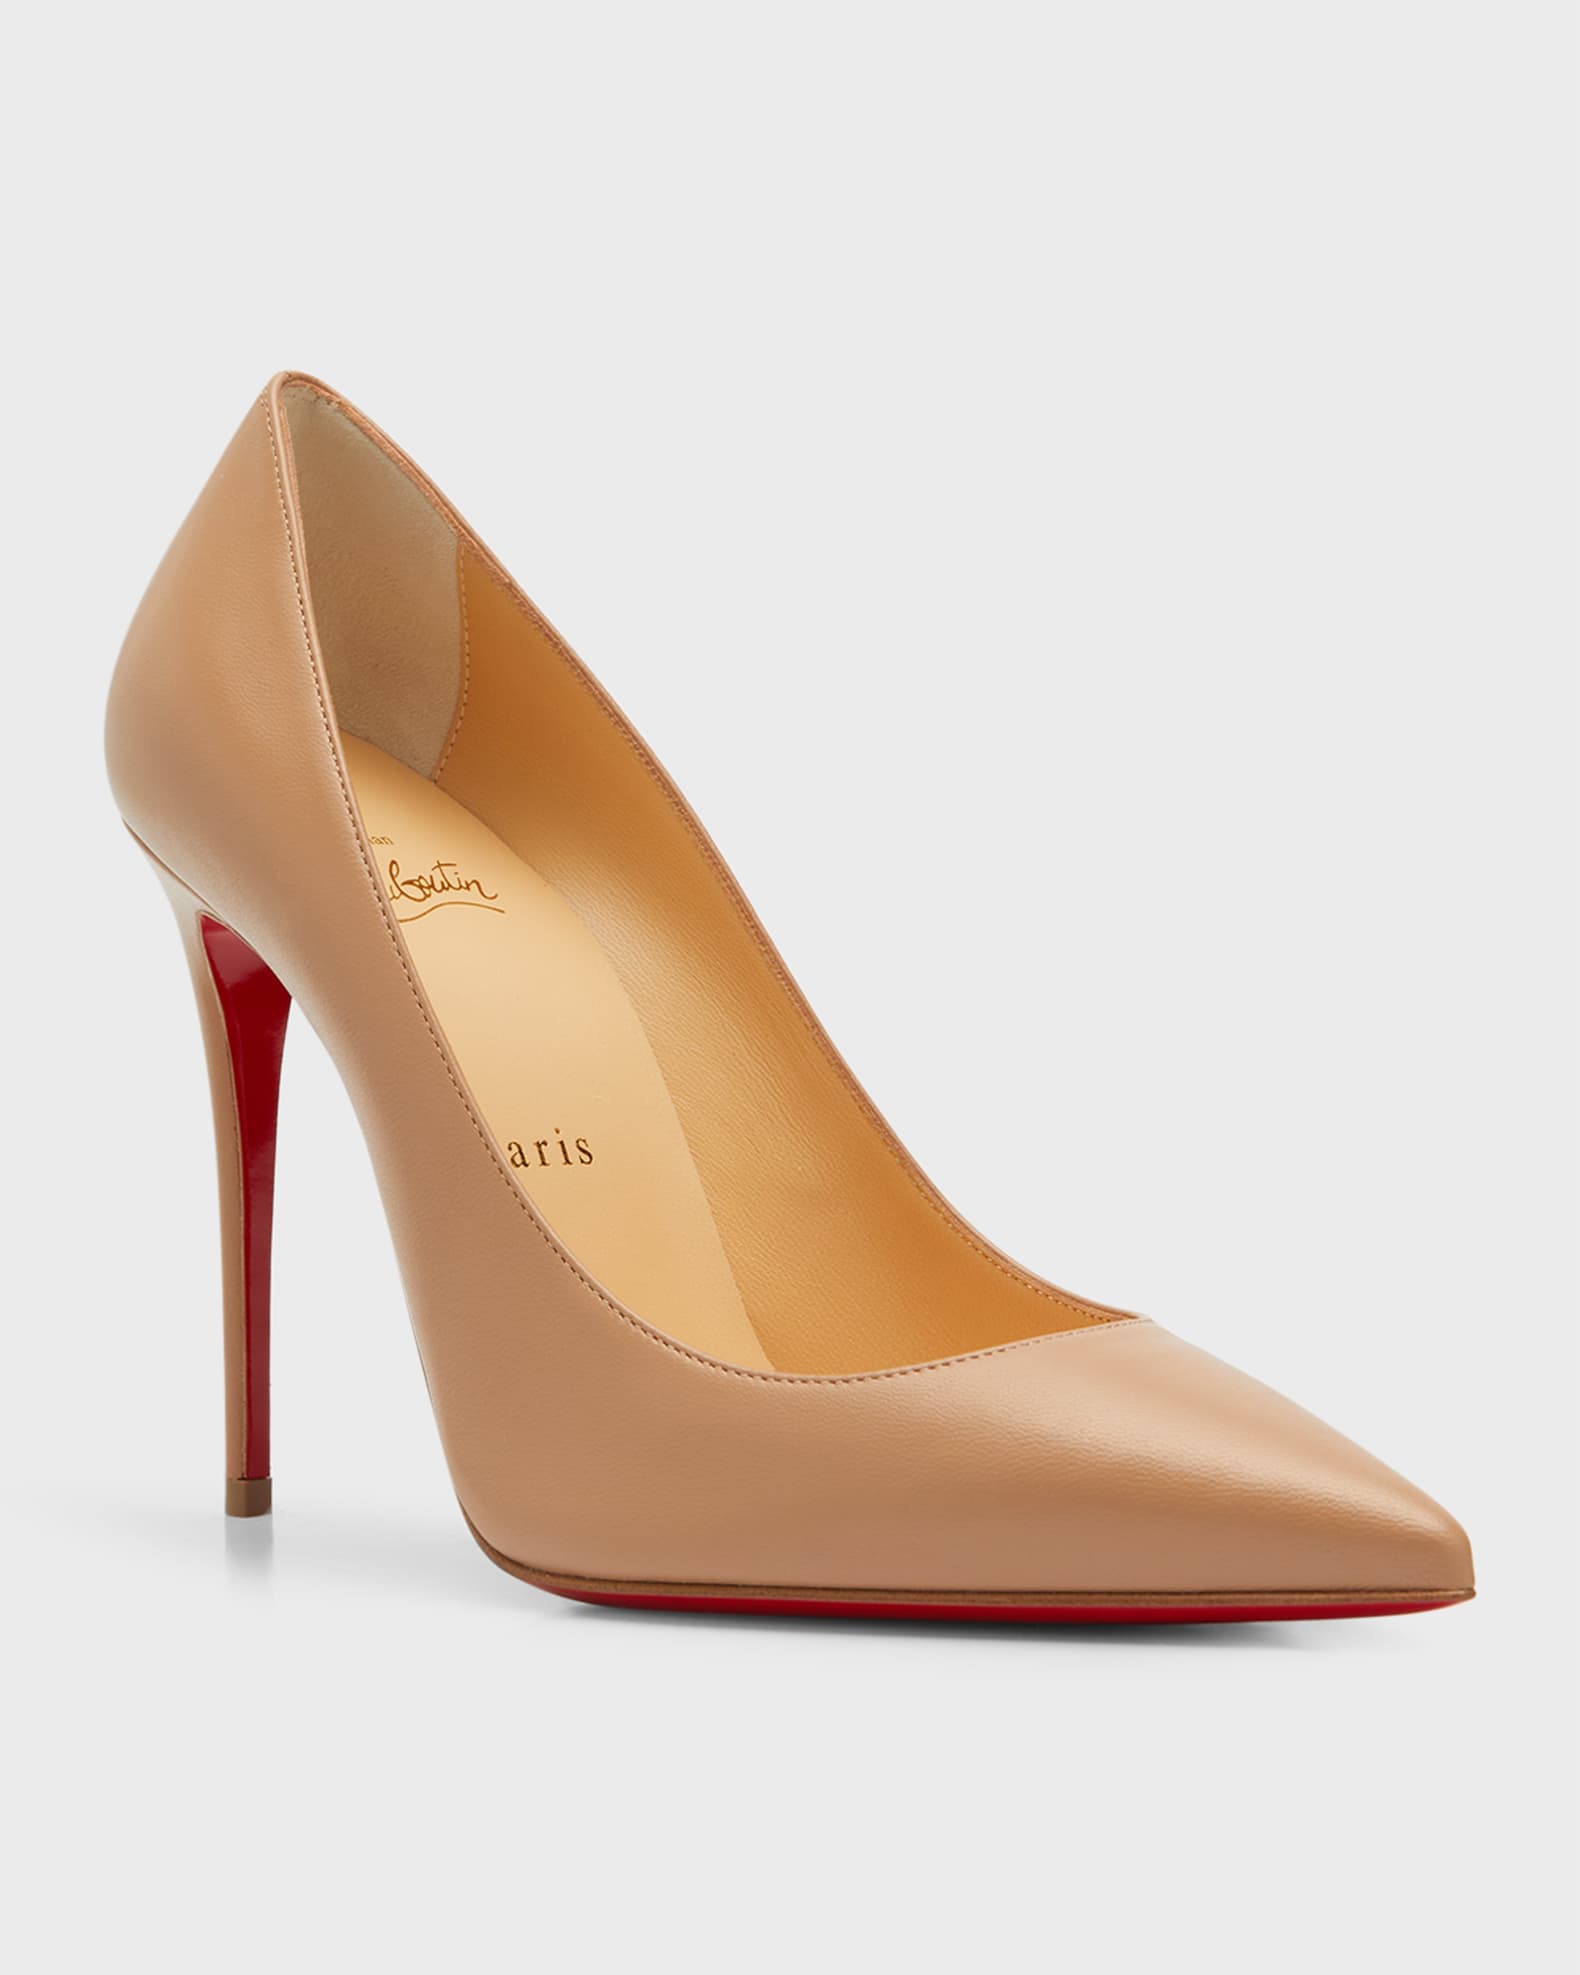 Christian Louboutin Kate 100mm Napa Red Sole Pumps | Neiman Marcus